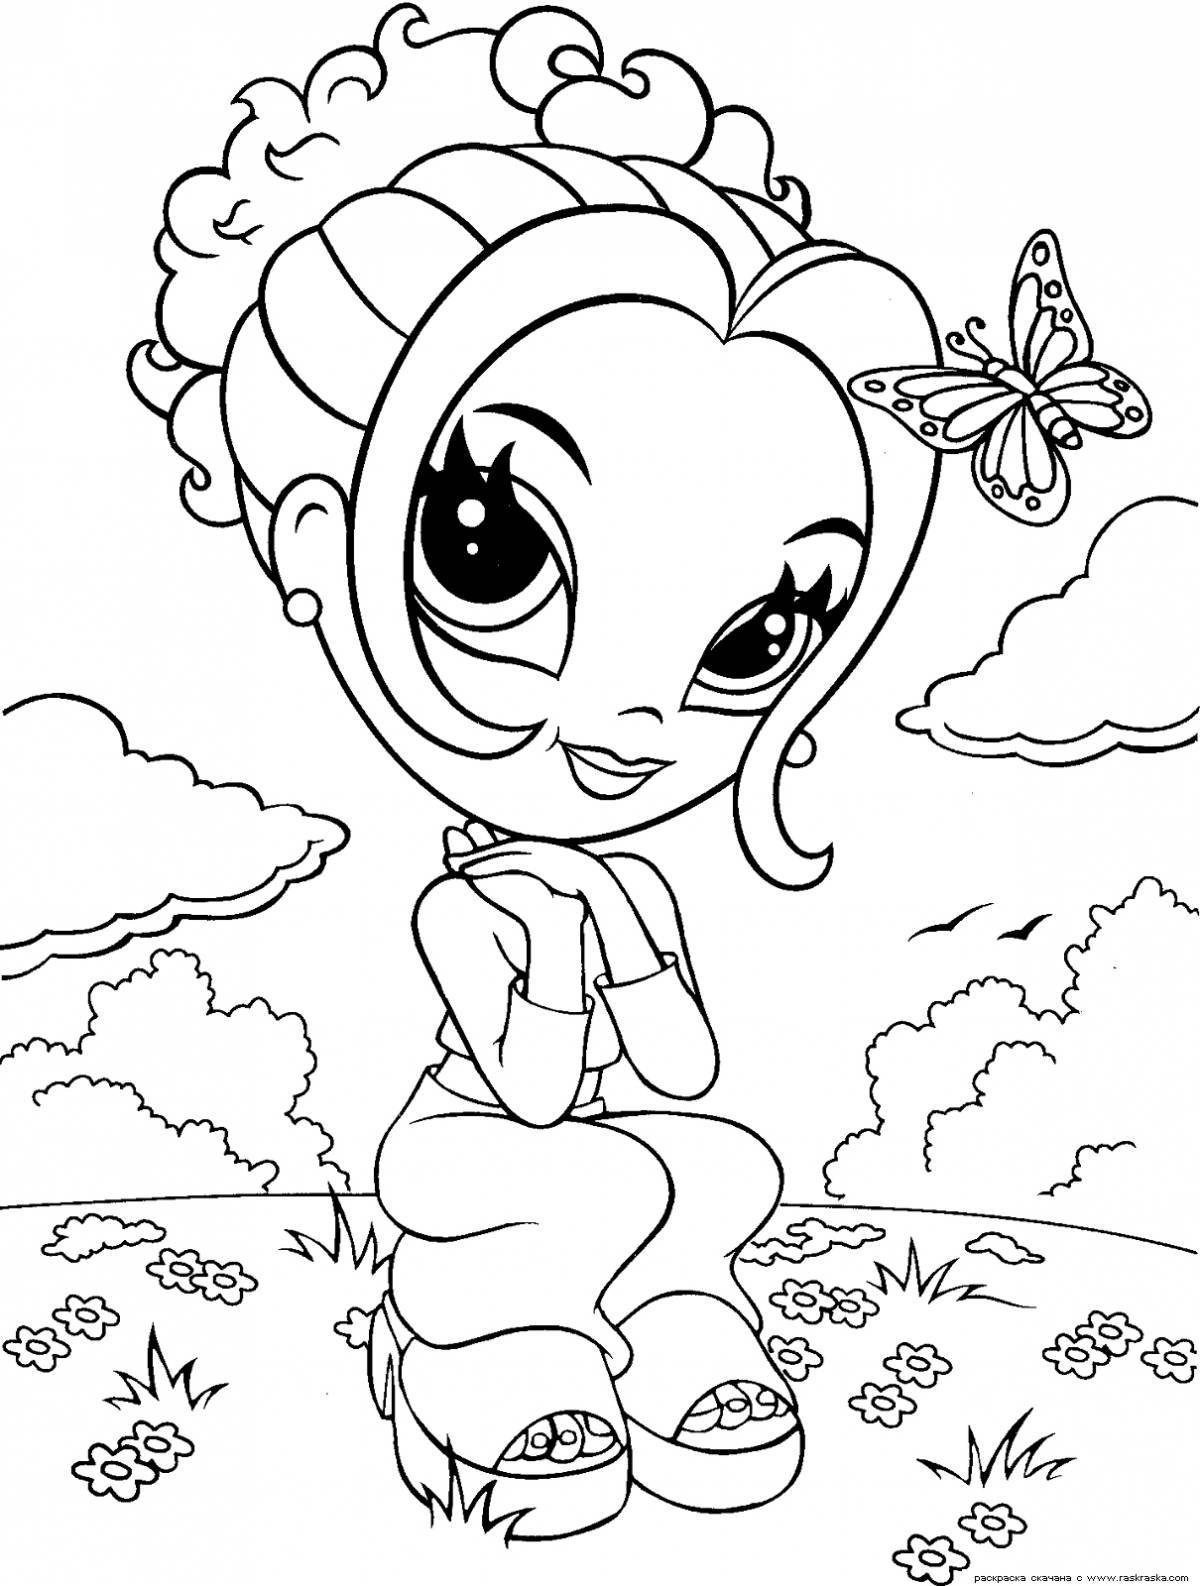 Glowing girly coloring book